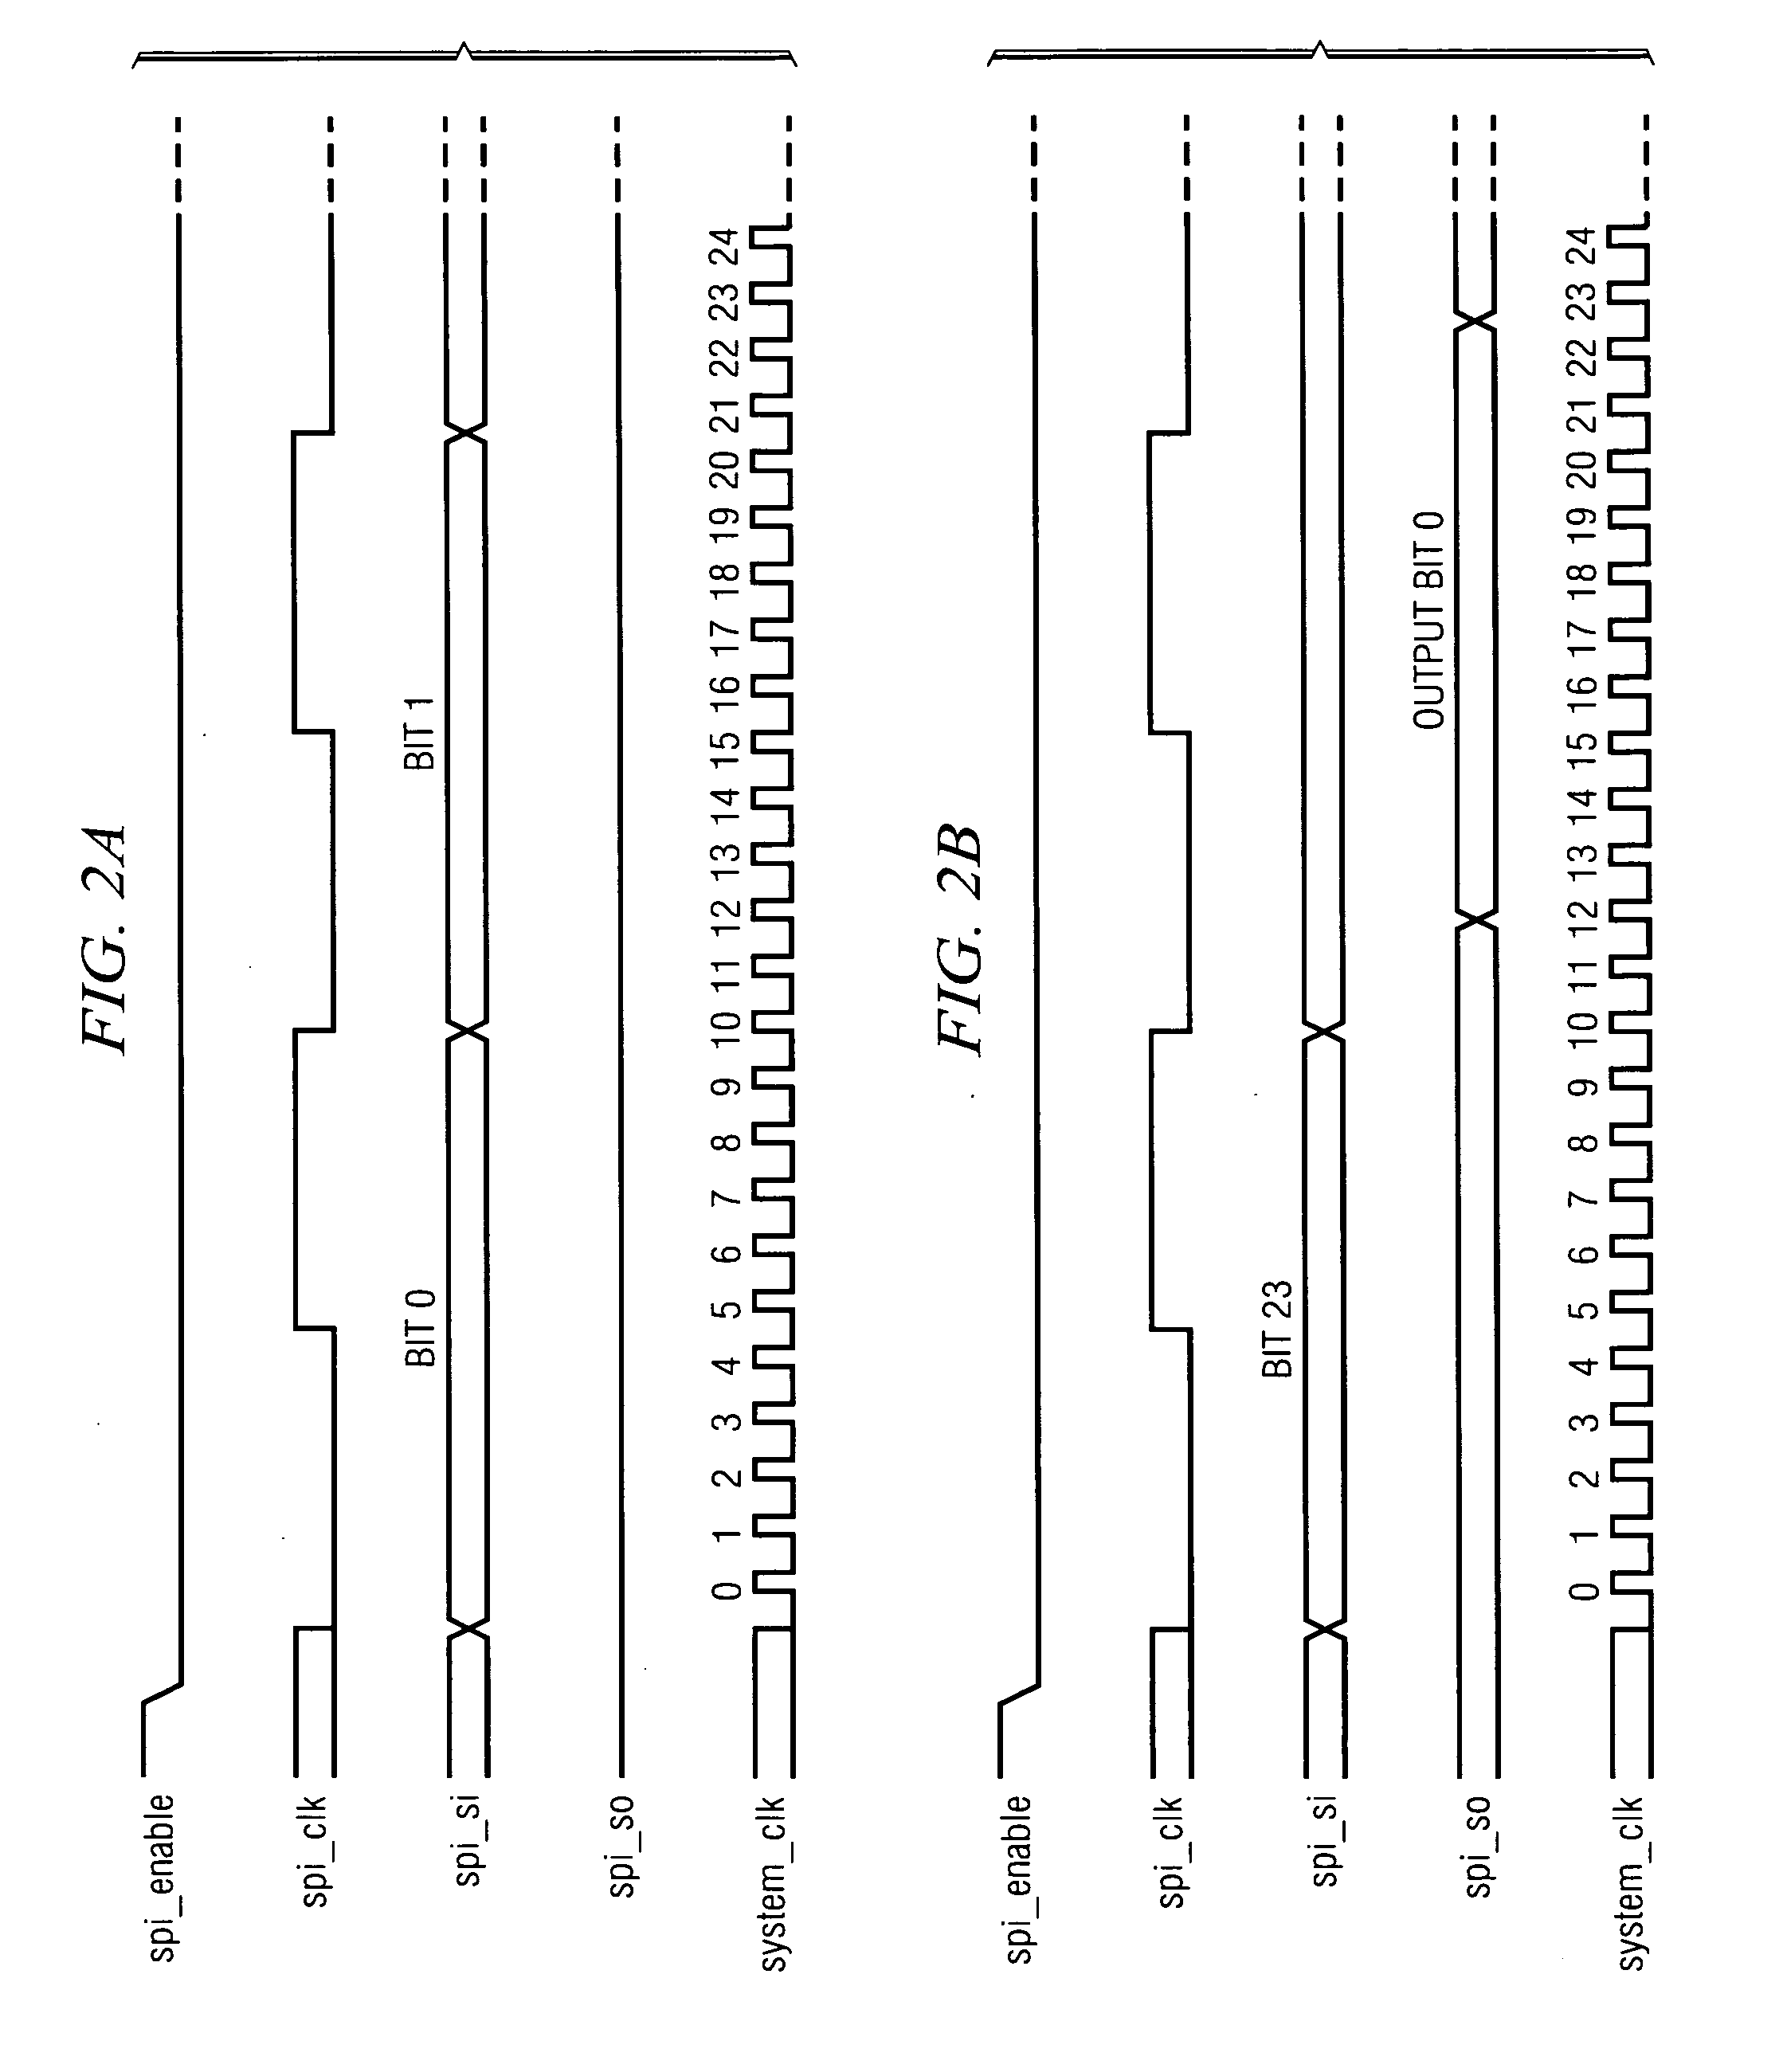 High speed on-chip serial link apparatus and method